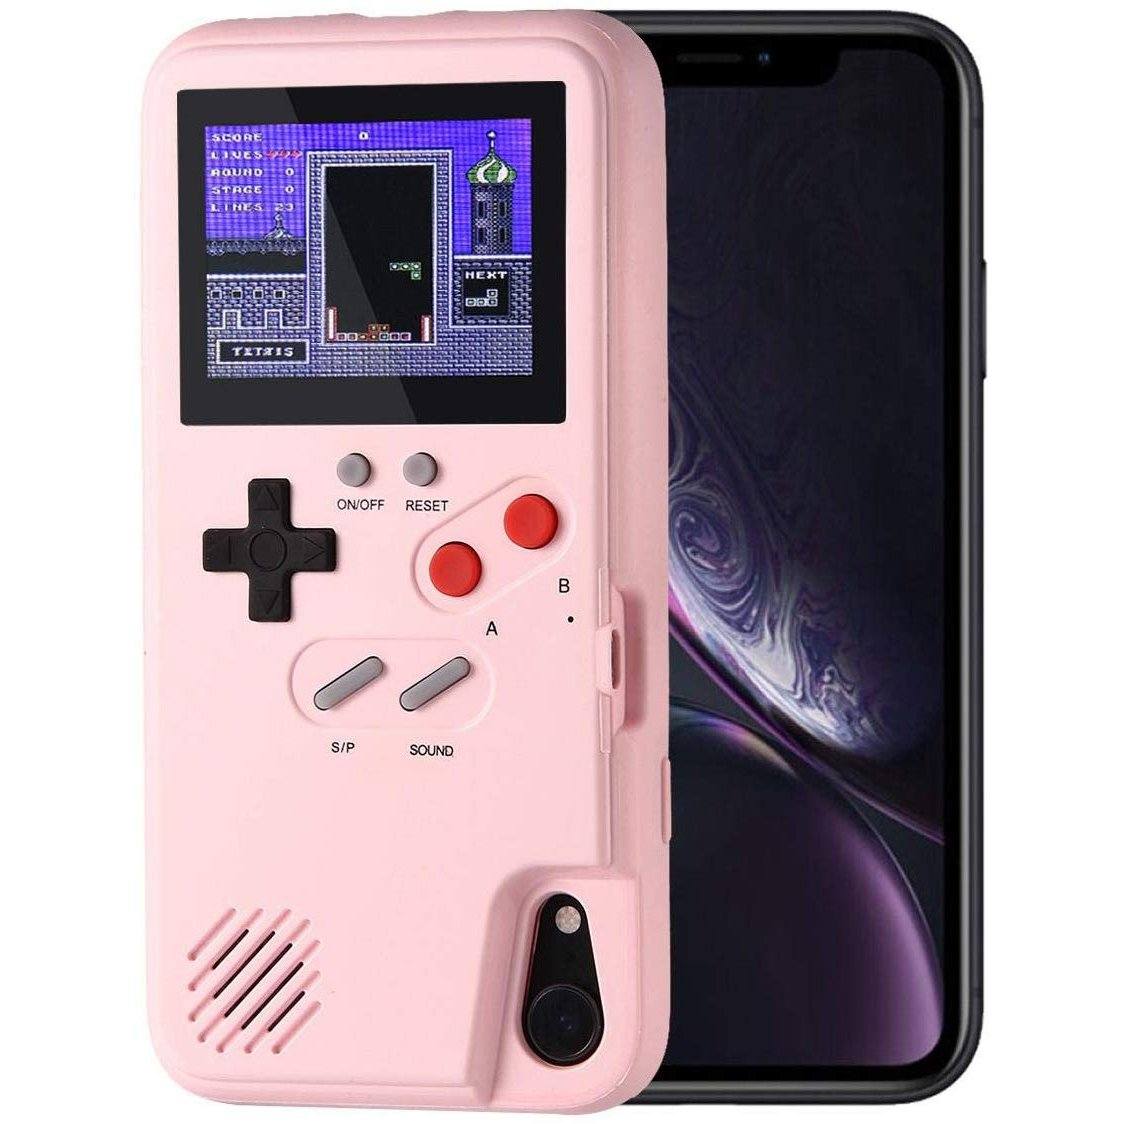 Retro Gaming Case 36 Games in 1 for iPhone and Samsung Phone / Pink